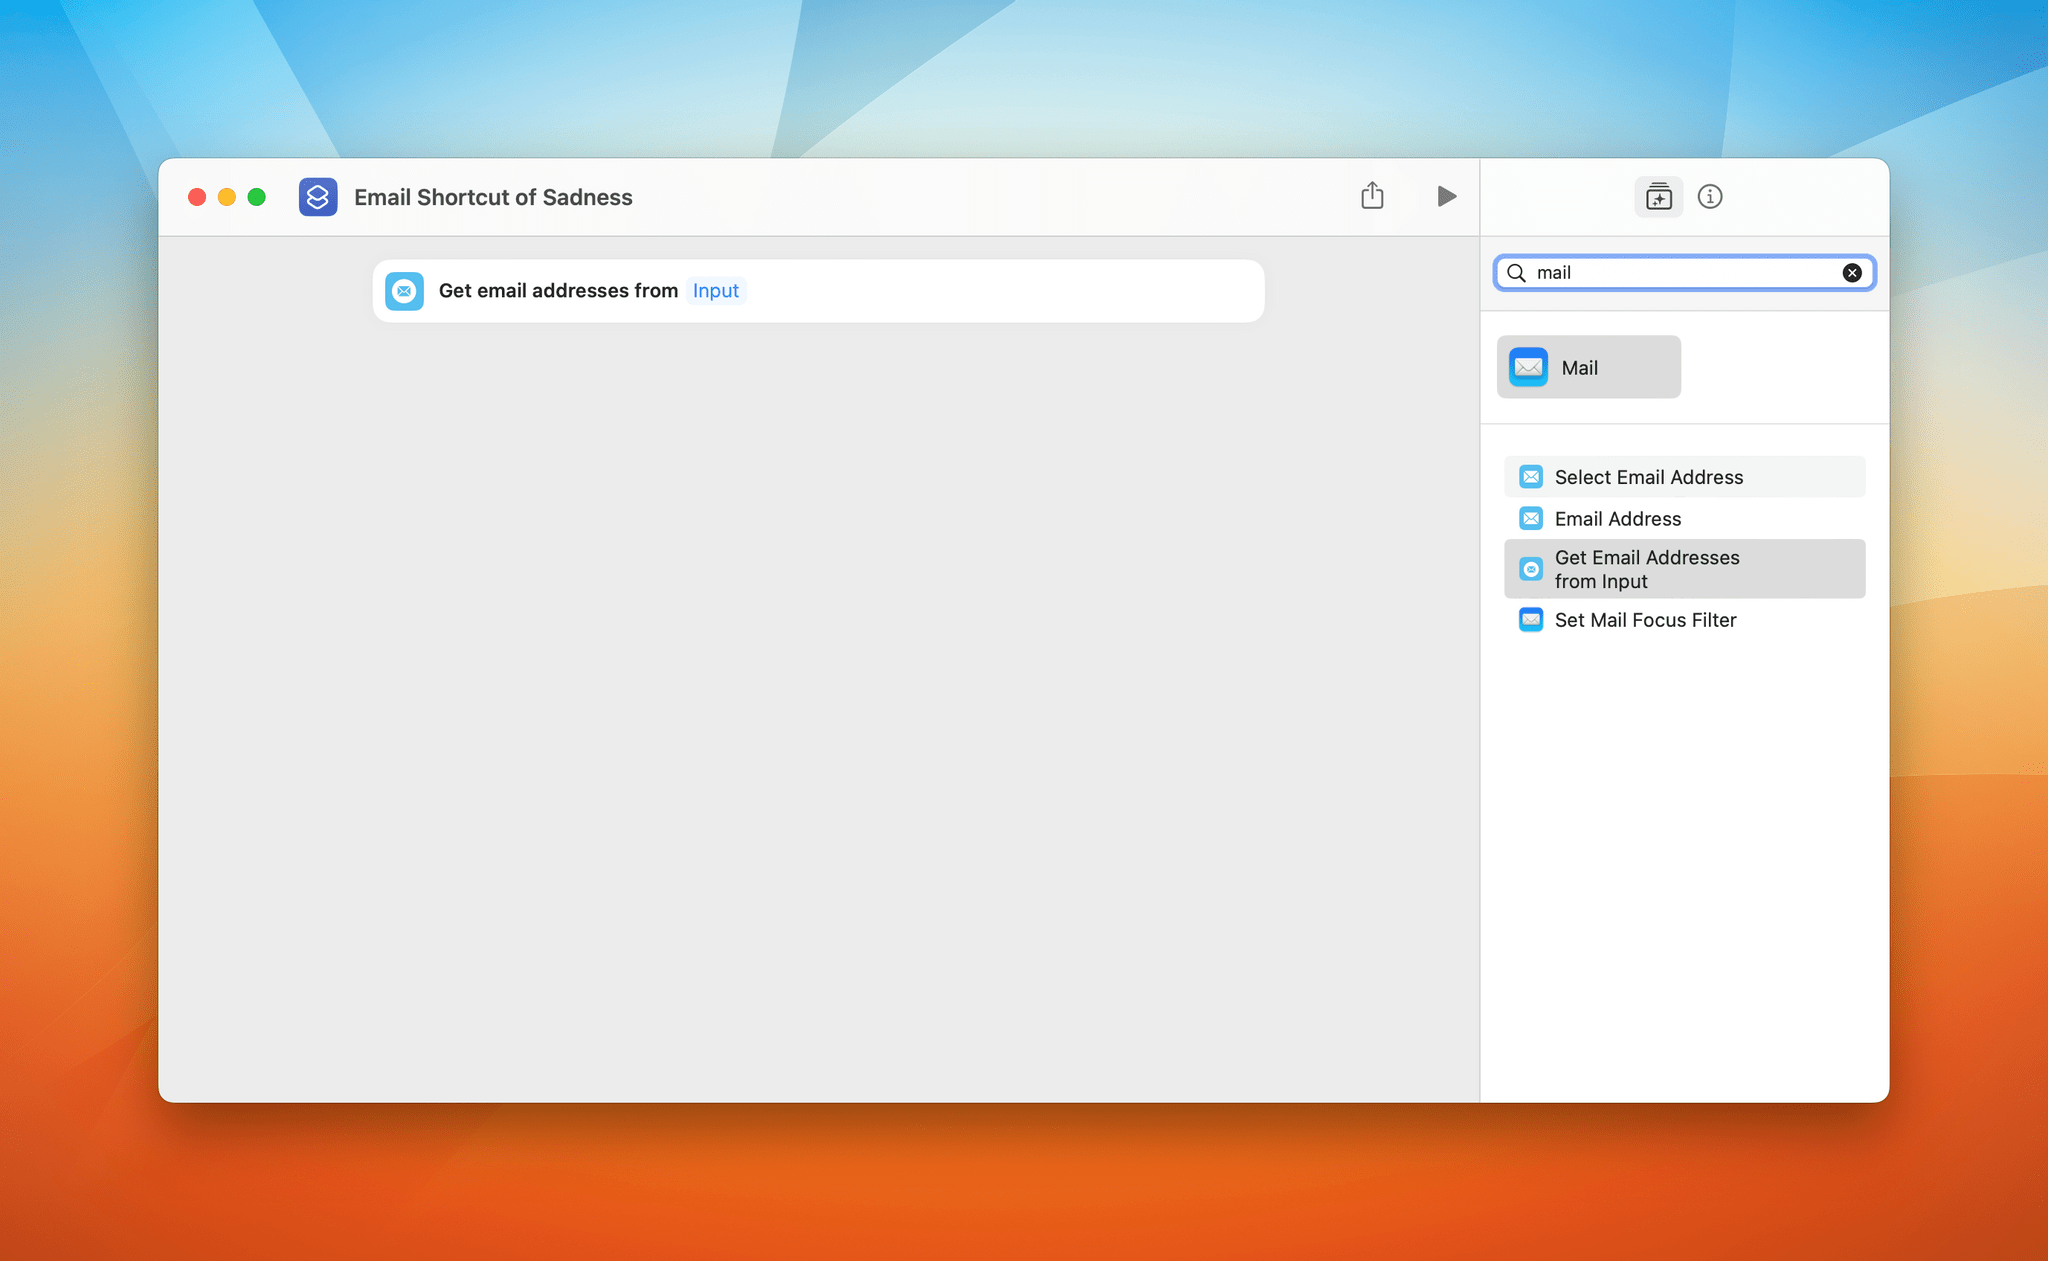 Behold, Mail's four shortcuts actions.